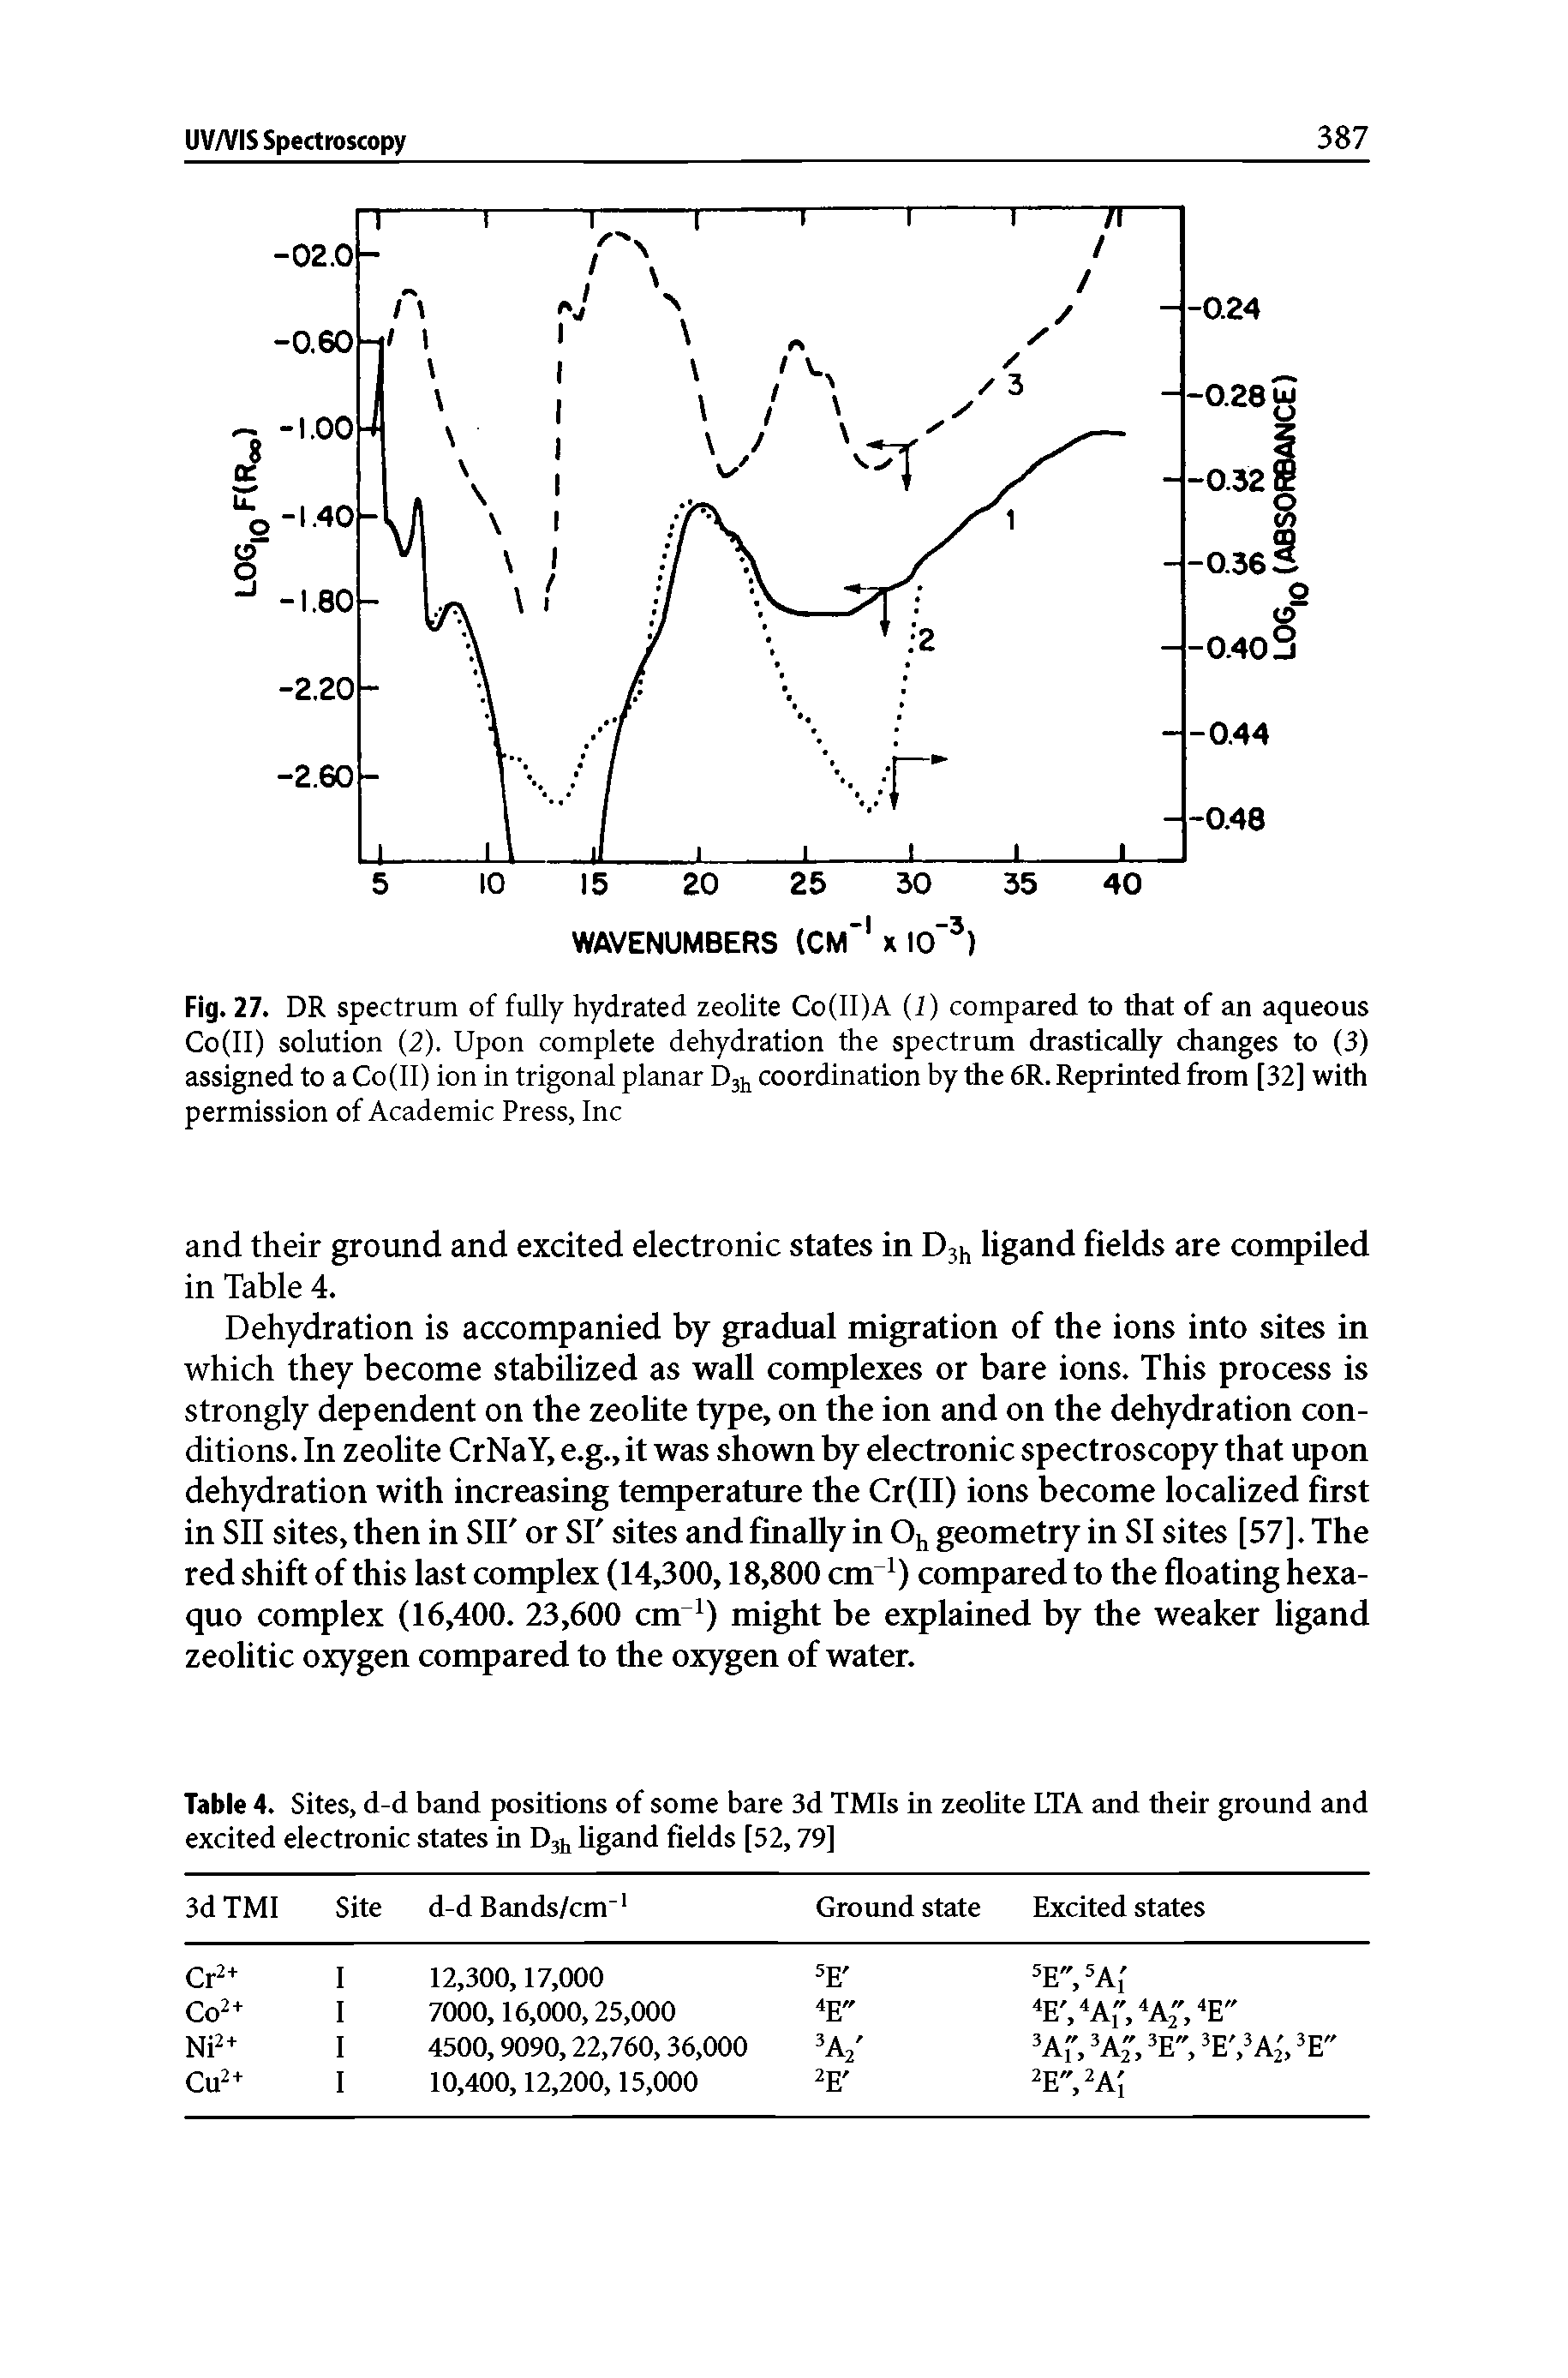 Fig. 27. DR spectrum of fully hydrated zeolite Co(ll)A (1) compared to that of an aqueous Co(II) solution (2). Upon complete dehydration the spectrum drastically changes to (3) assigned to a Co(ll) ion in trigonal planar Dji, coordination by the 6R. Reprinted from [32] with permission of Academic Press, Inc...